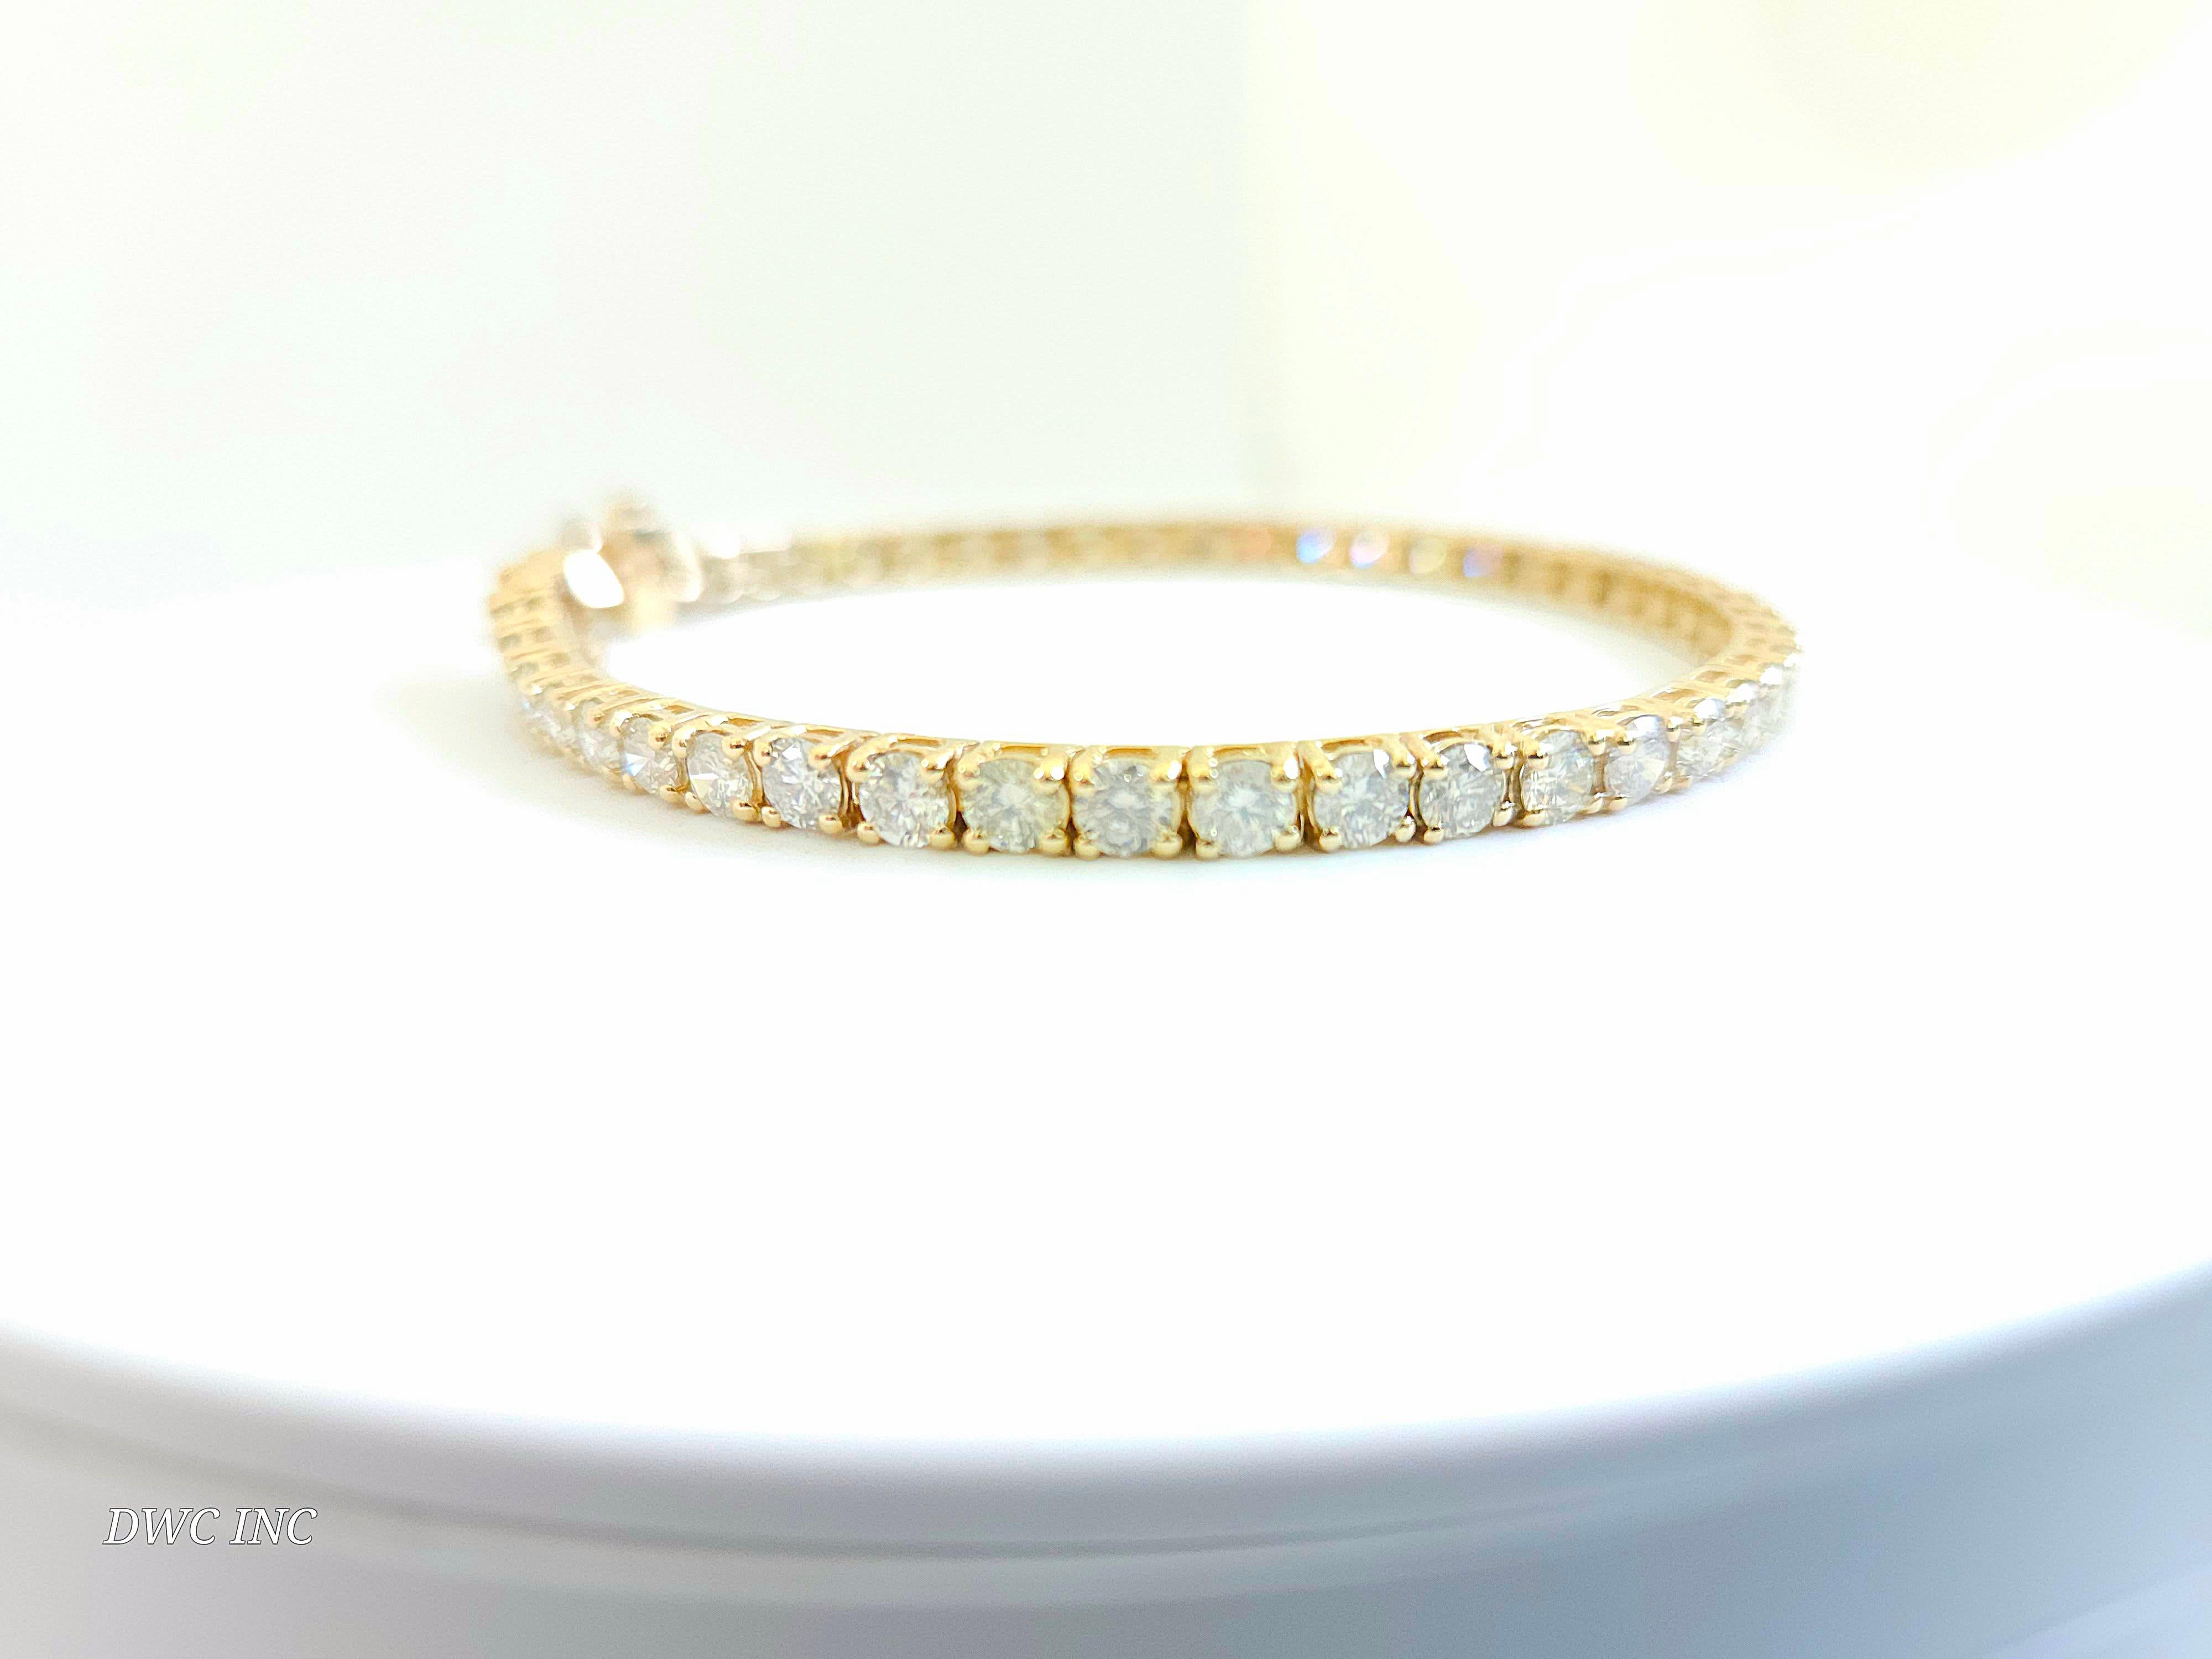 Natural diamonds tennis bracelet round-brilliant cut  14k yellow gold. 
7 inch. Average Color I, Clarity SI, 3.50 mm wide,46 pcs, 12.55 grams very shiny don't miss.

*Free shipping within U.S*

